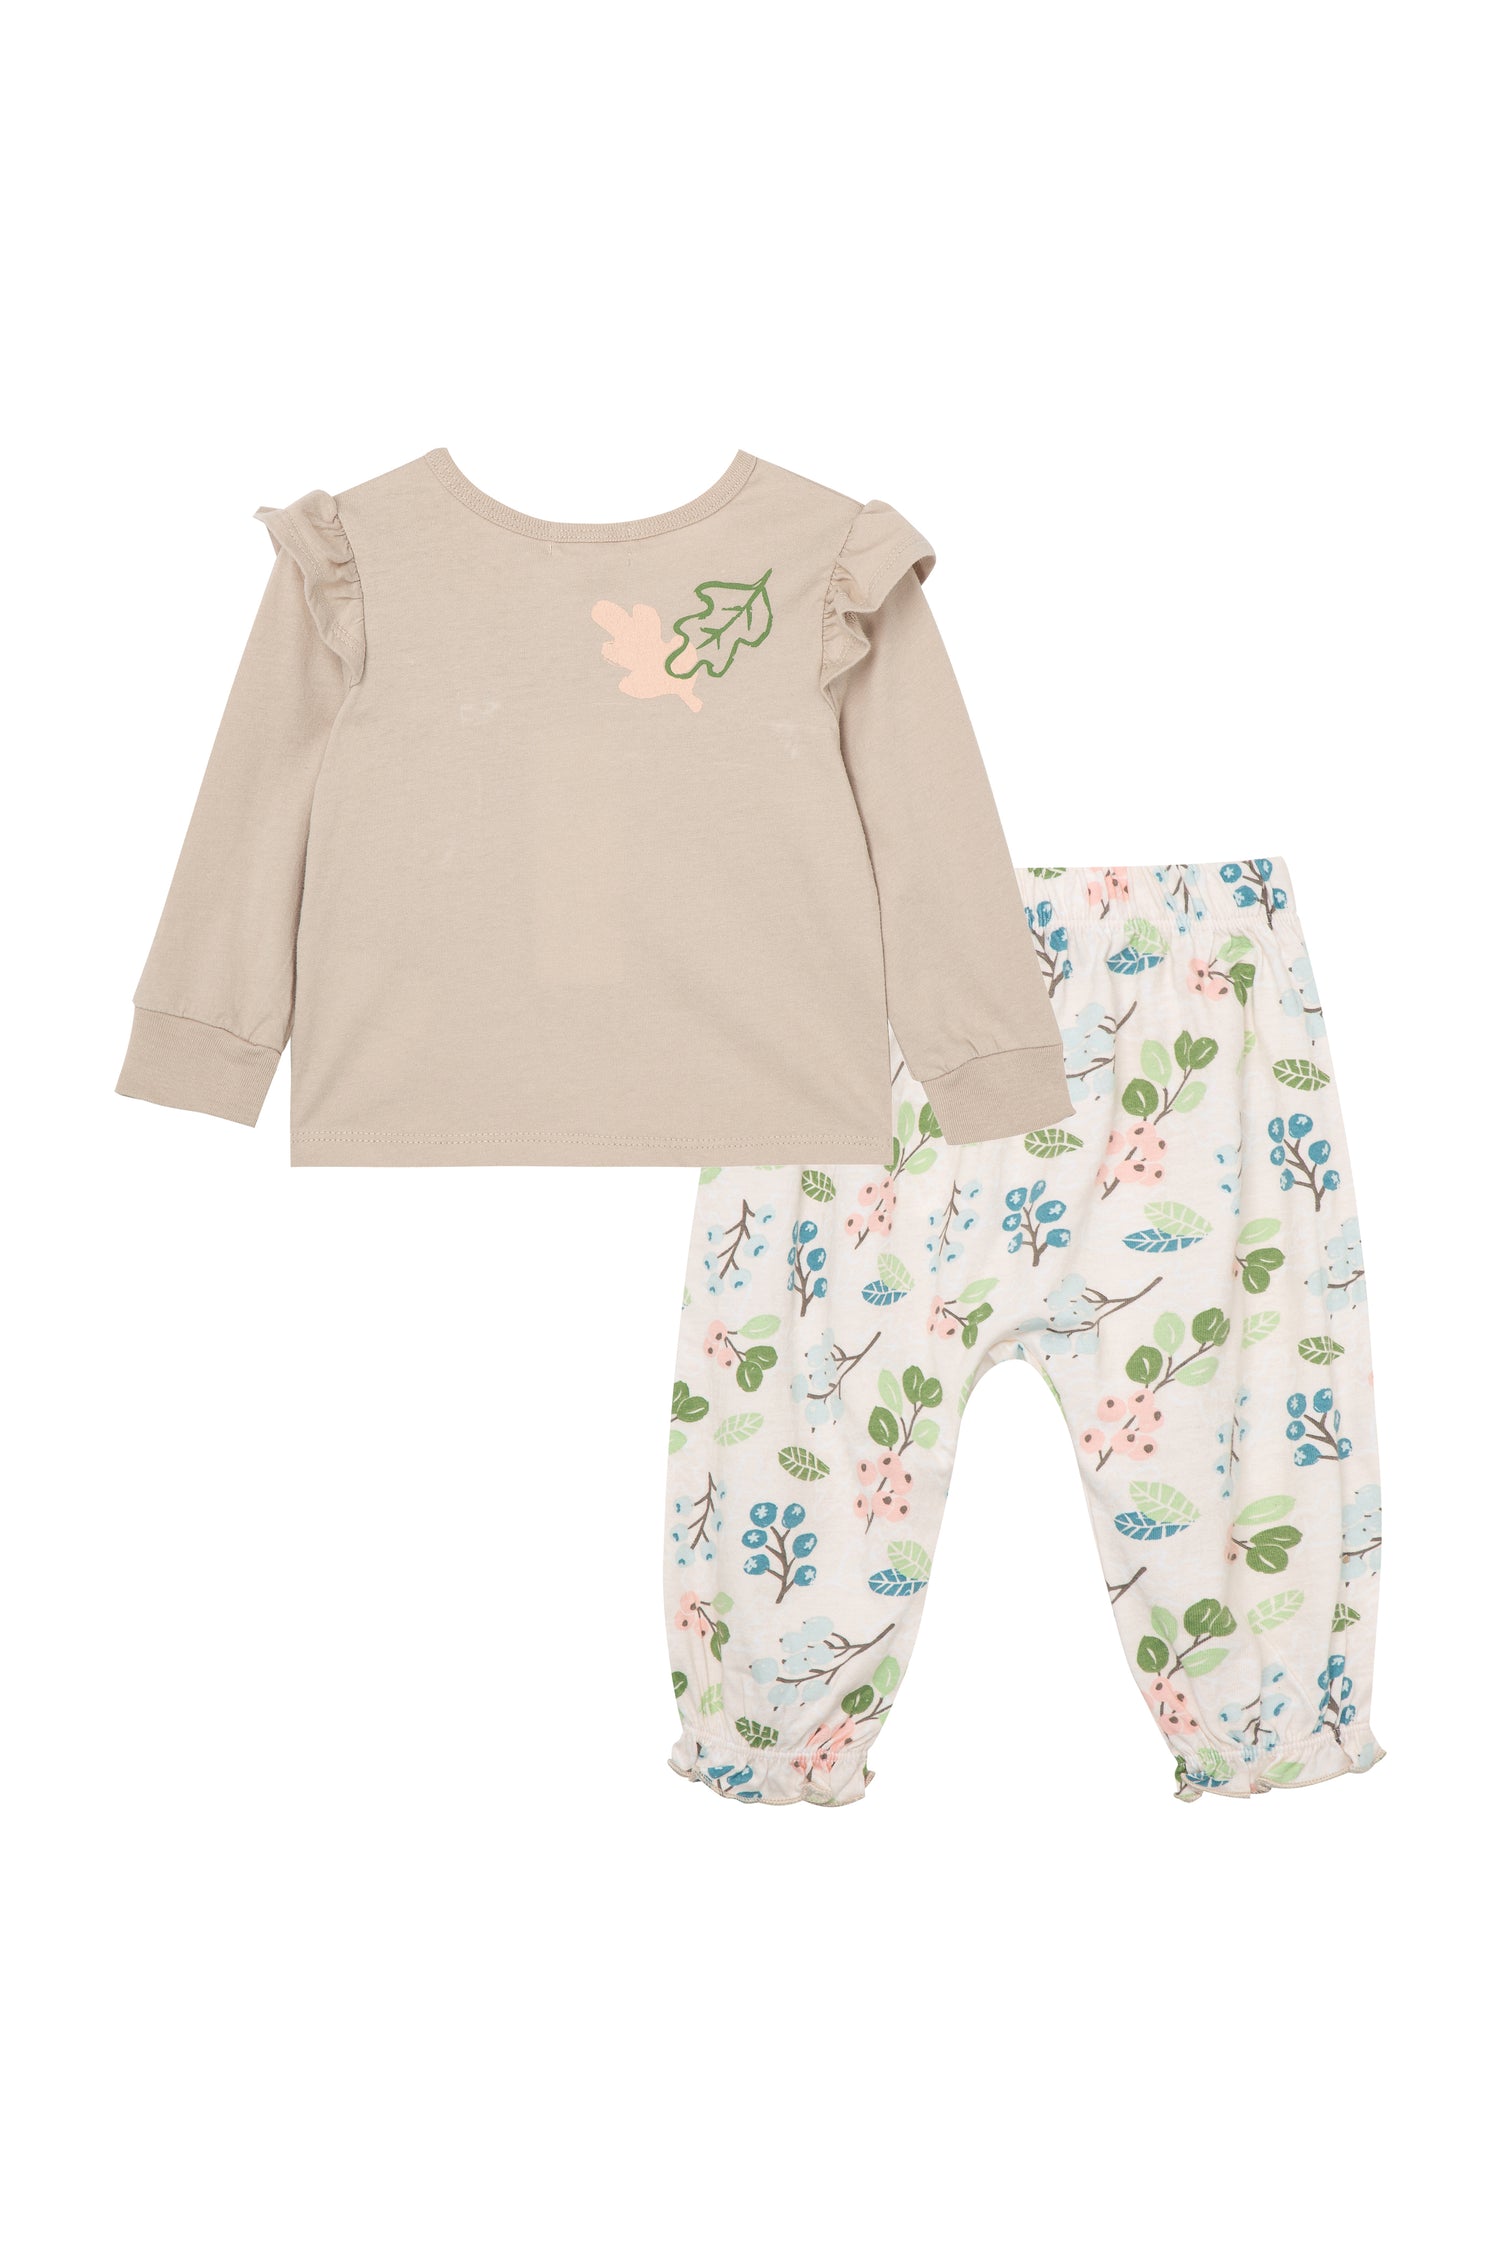 Gray sweatshirt with illustrated leaves; white sweatpants with multi-colored leaf pattern